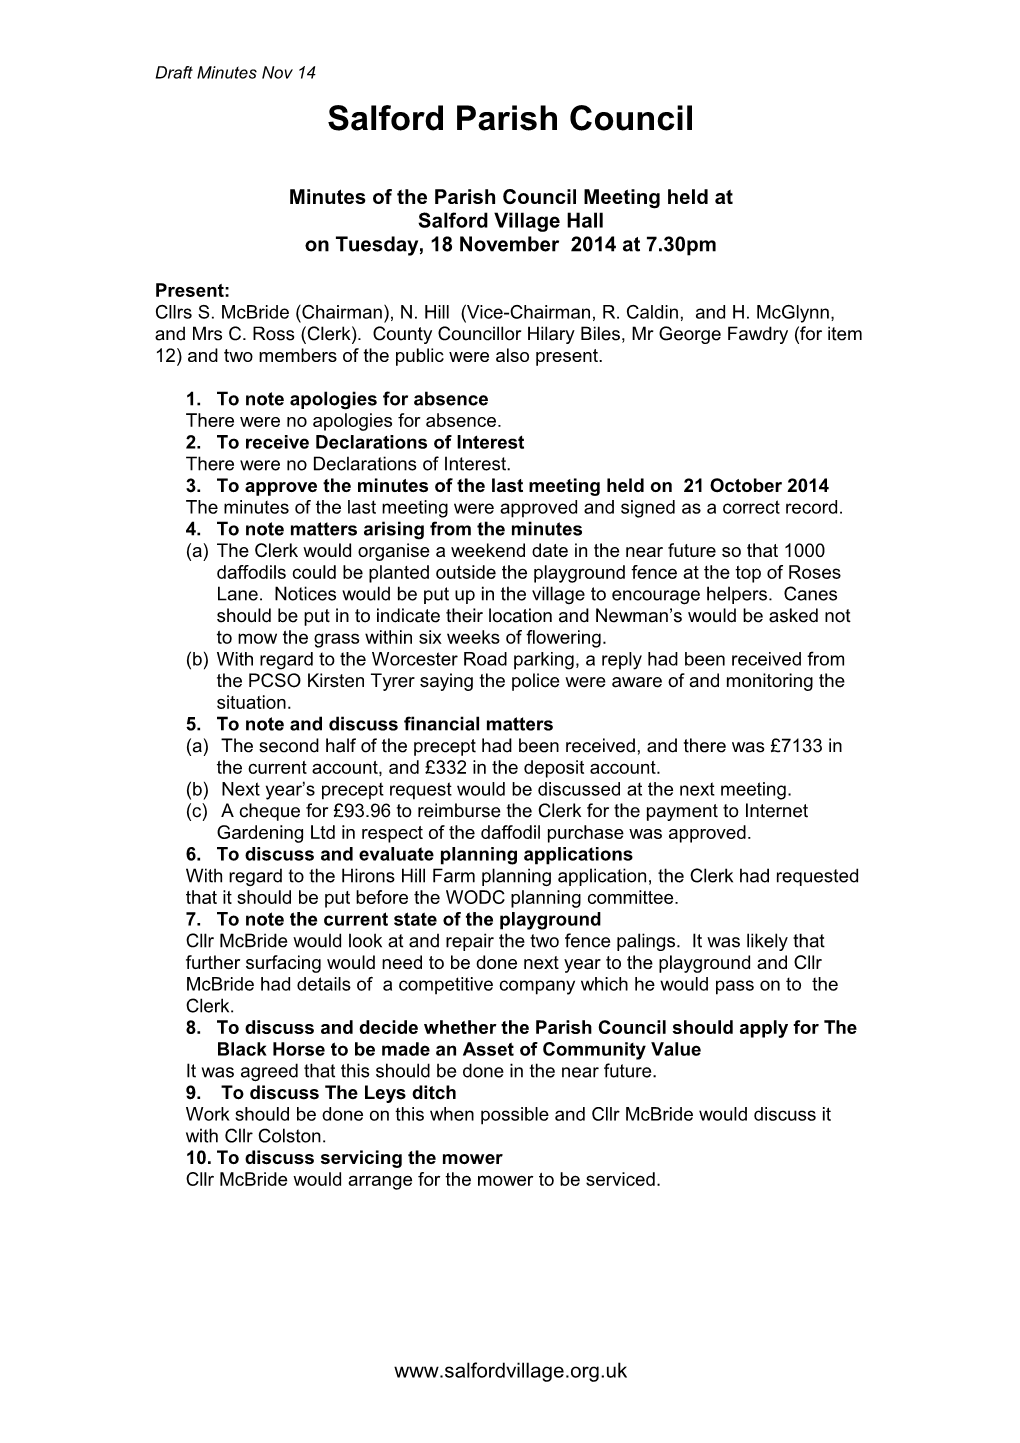 Minutes of the Parish Council Meeting Held At s1